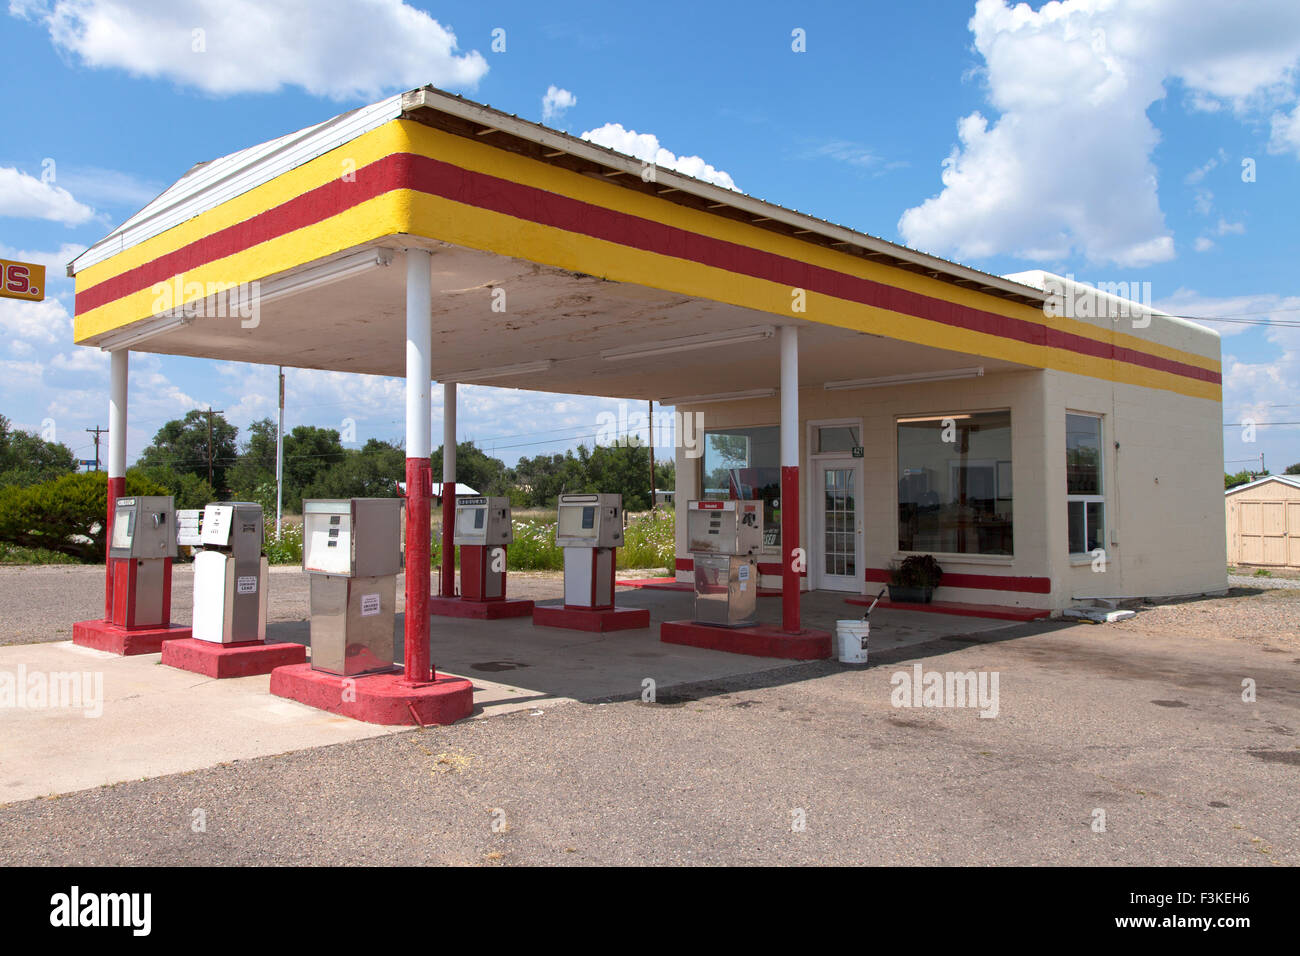 Wittling Bros Tankstelle entlang der Route 66 in Moriarty, New Mexico. Stockfoto